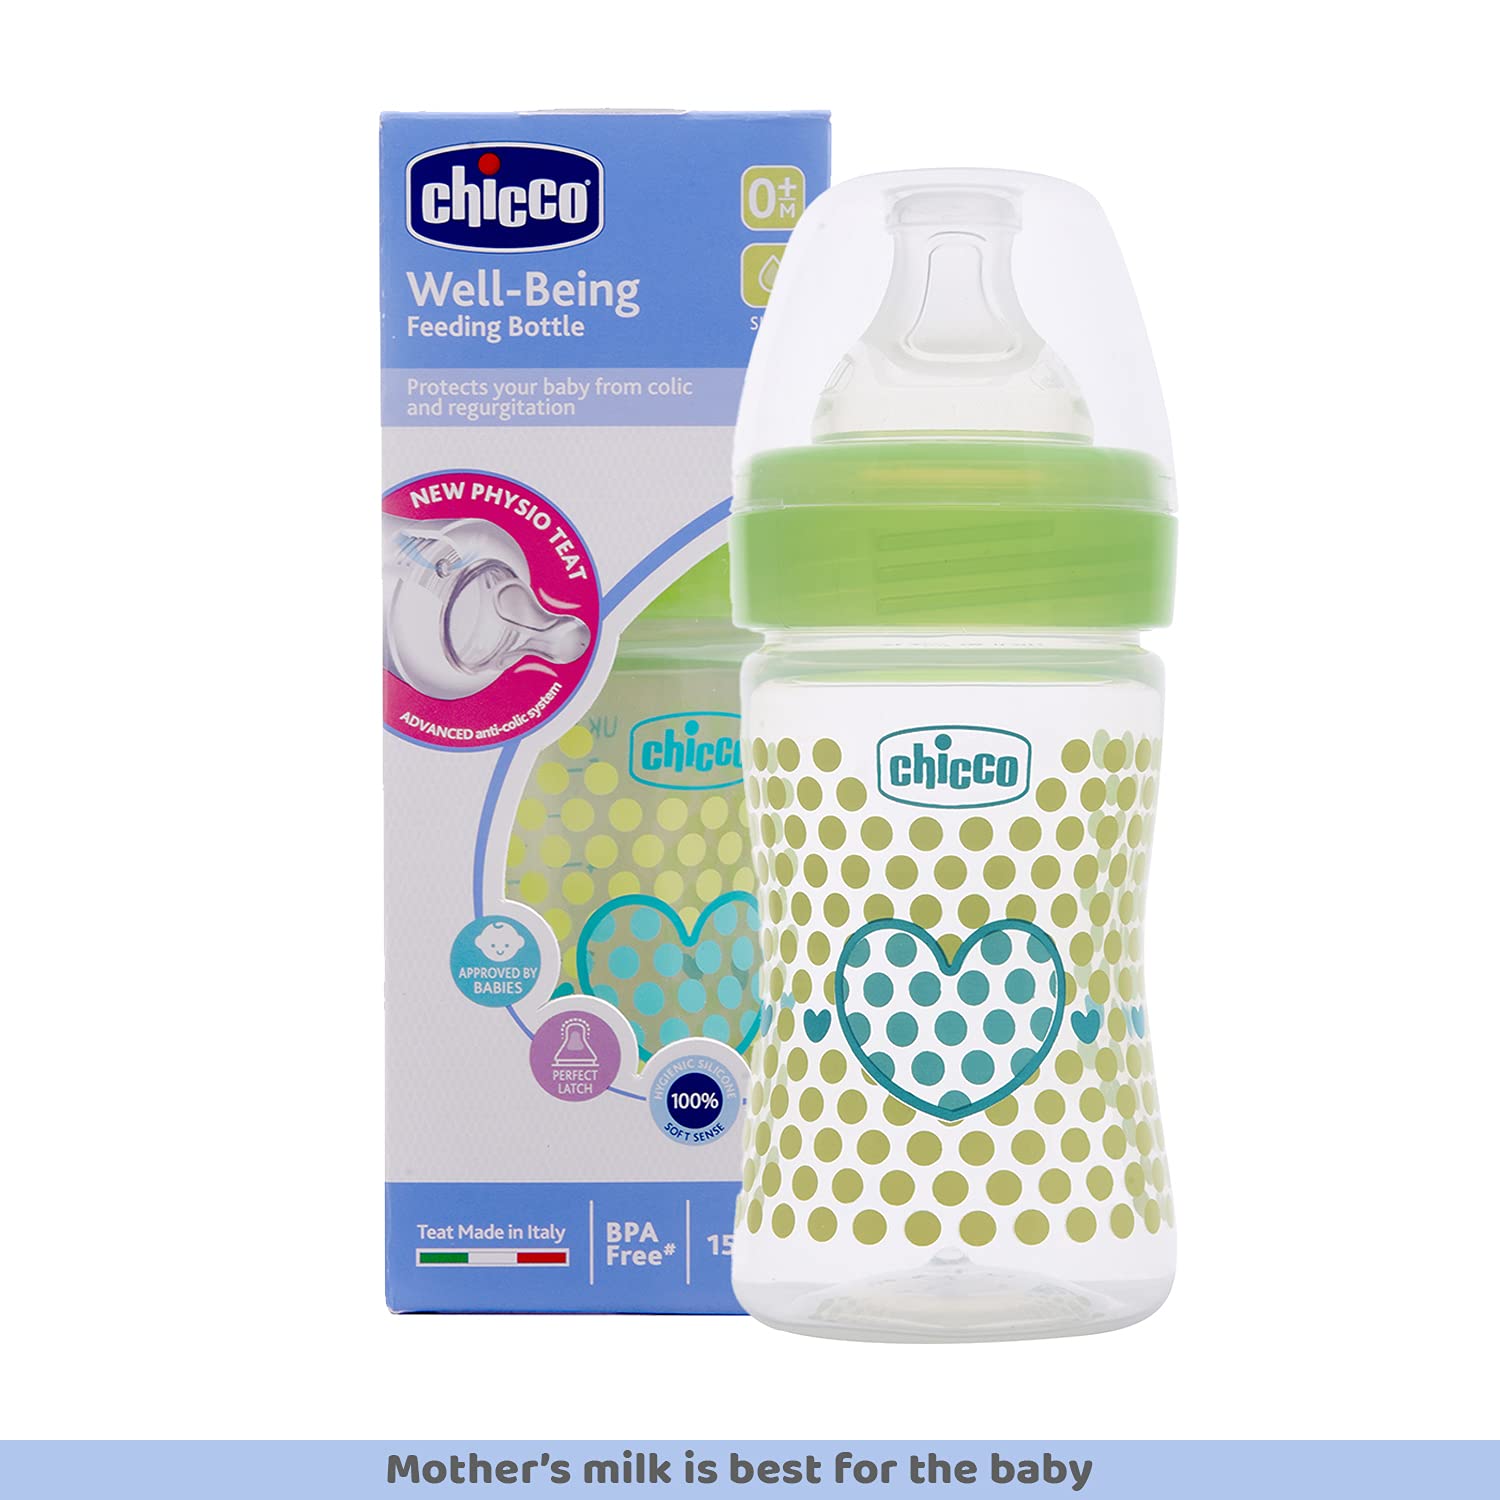 Chicco Well-Being 150 ml Feeding Bottle, Advanced Anti-Colic System, BPA Free, Hygienic Silicone Teat (Green)